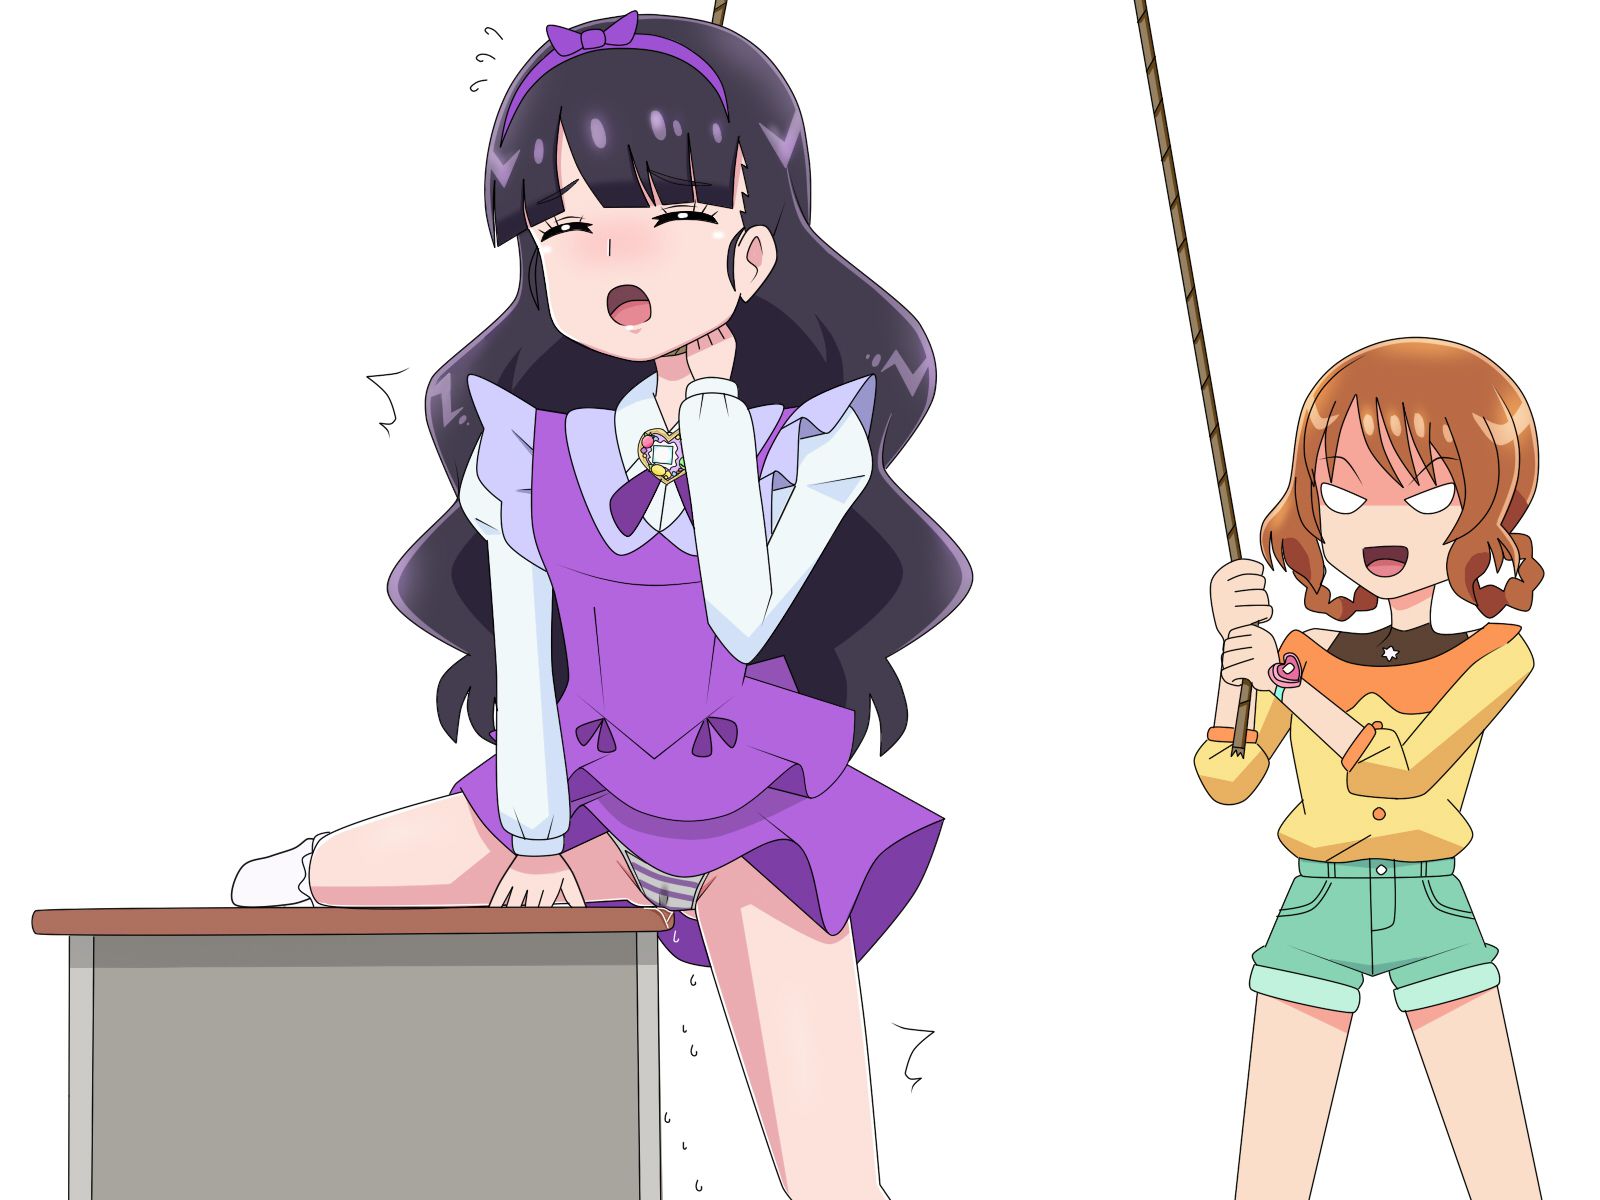 [Kaku Ona Lori Girl] Secondary erotic image of a secondary loli girl indulging in angular masturbation that she can't stand pressing her crotch against the desk 59